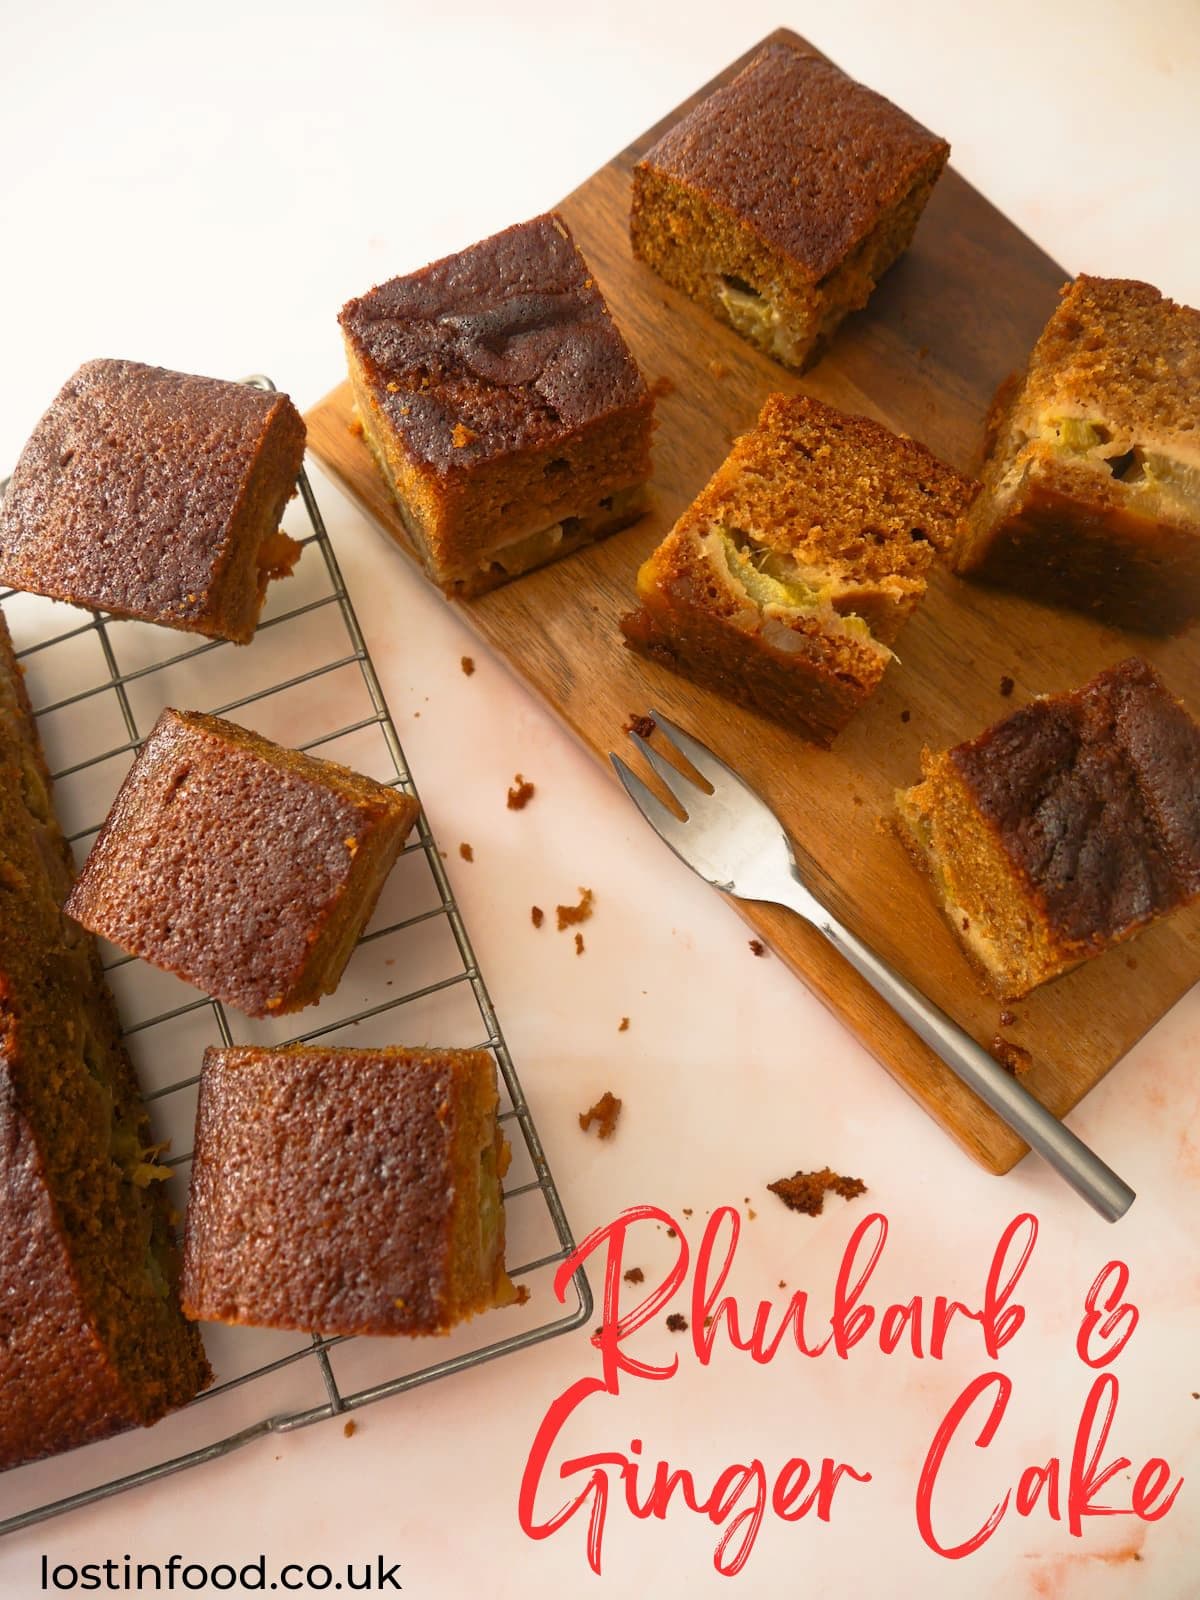 Pinnable image with recipe title and rhubarb and ginger cake set on a wire rack with a wooden board topped with slices of cake set alongside.